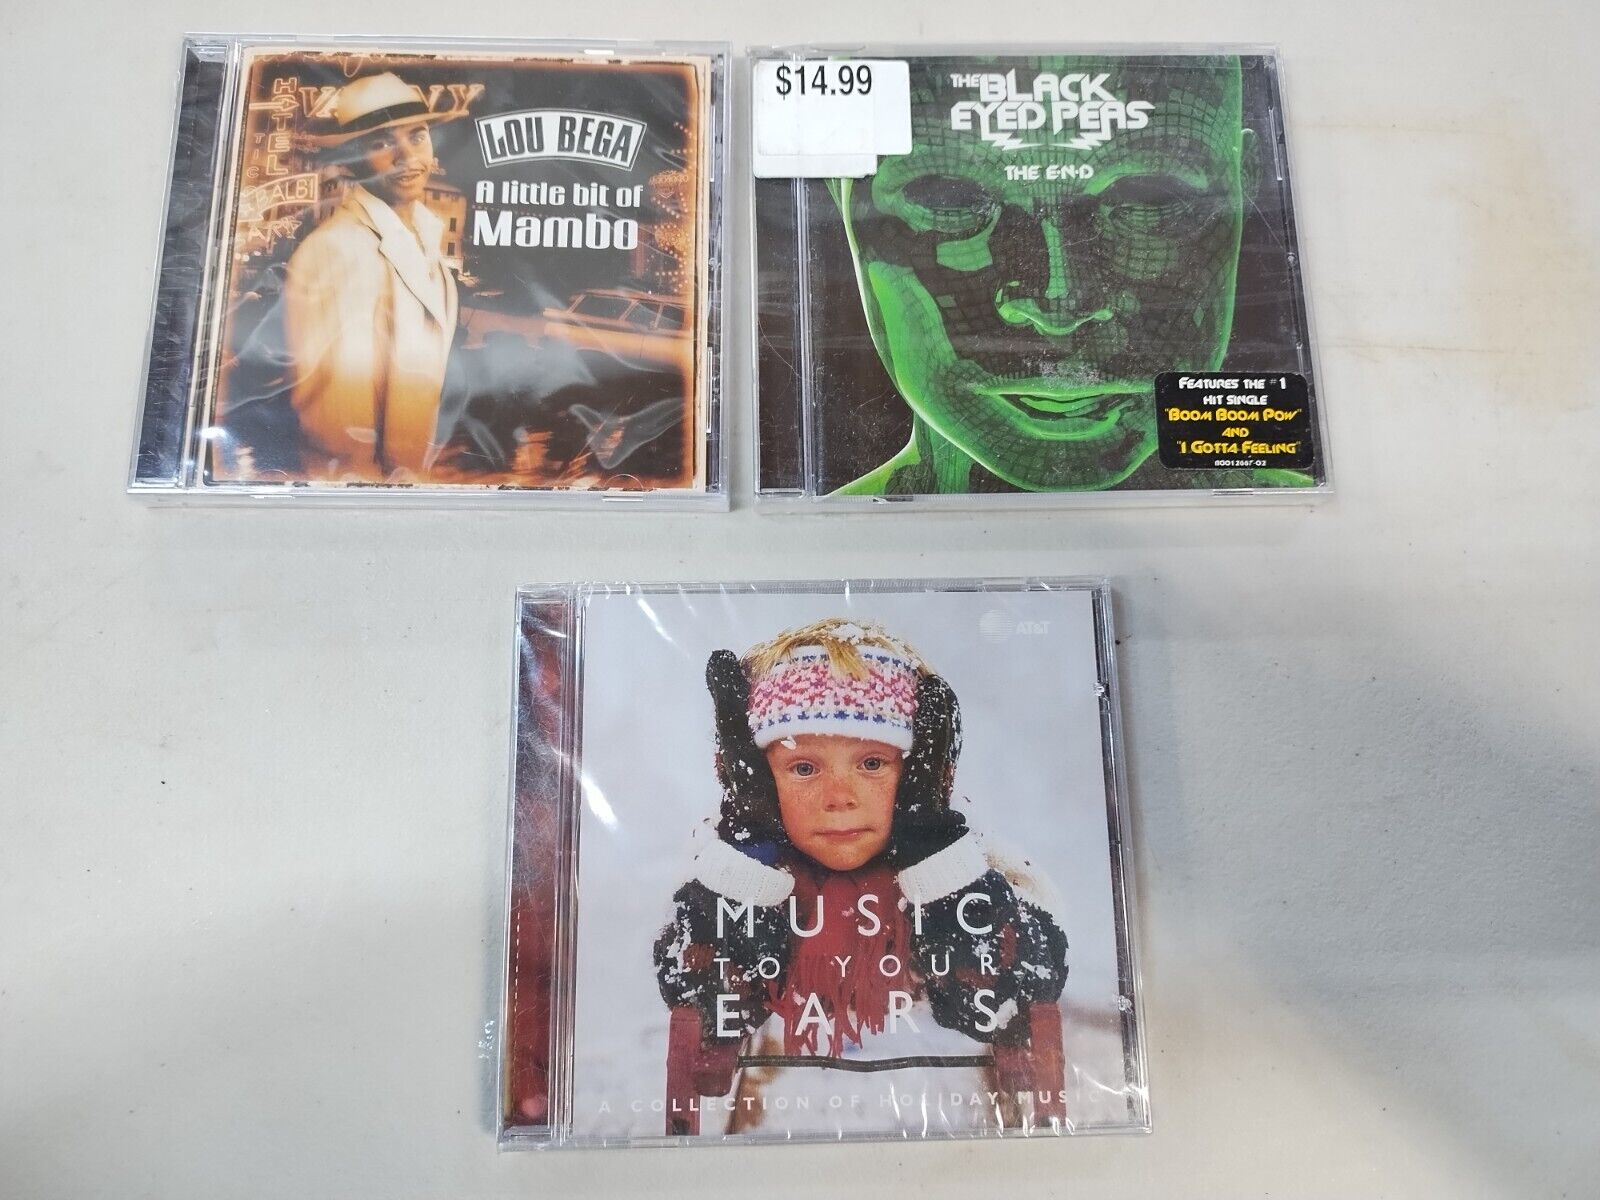 The Black Eyed Peas - The End CD + Lou Bega Mambo + Holiday NEW CDs Lot of 3